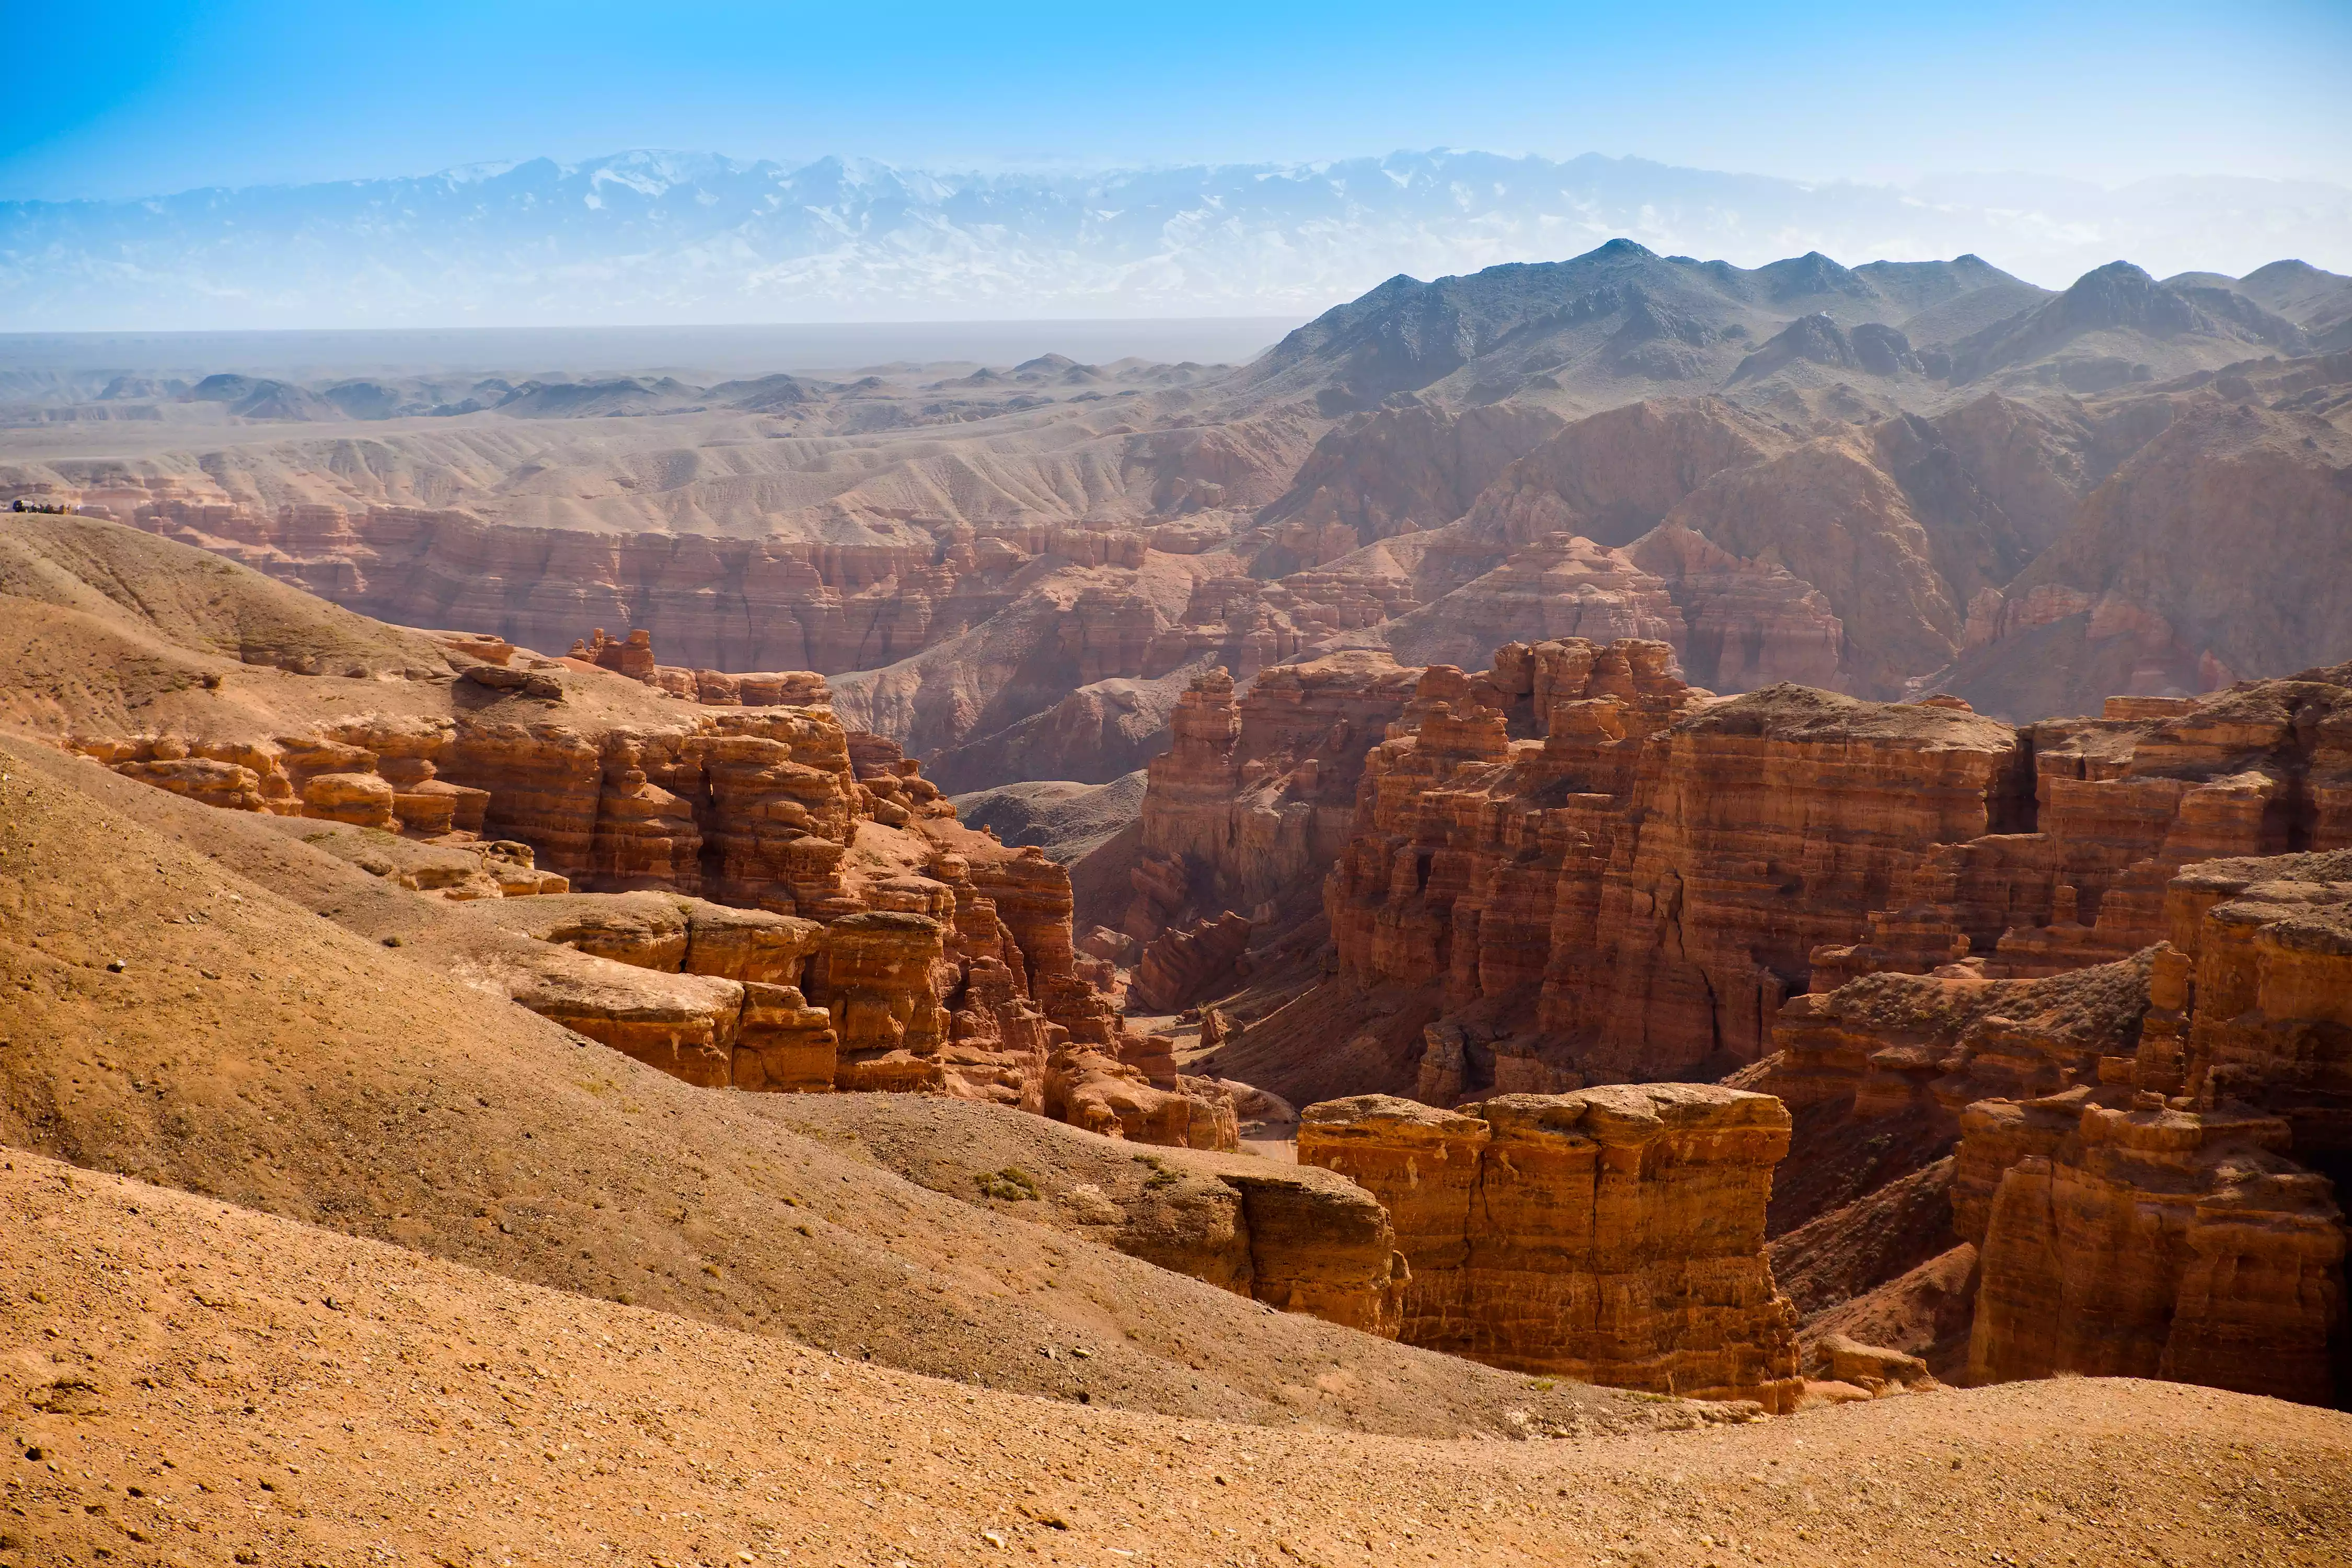 The stunning red vistas of Charyn Canyon in Kazakhstan